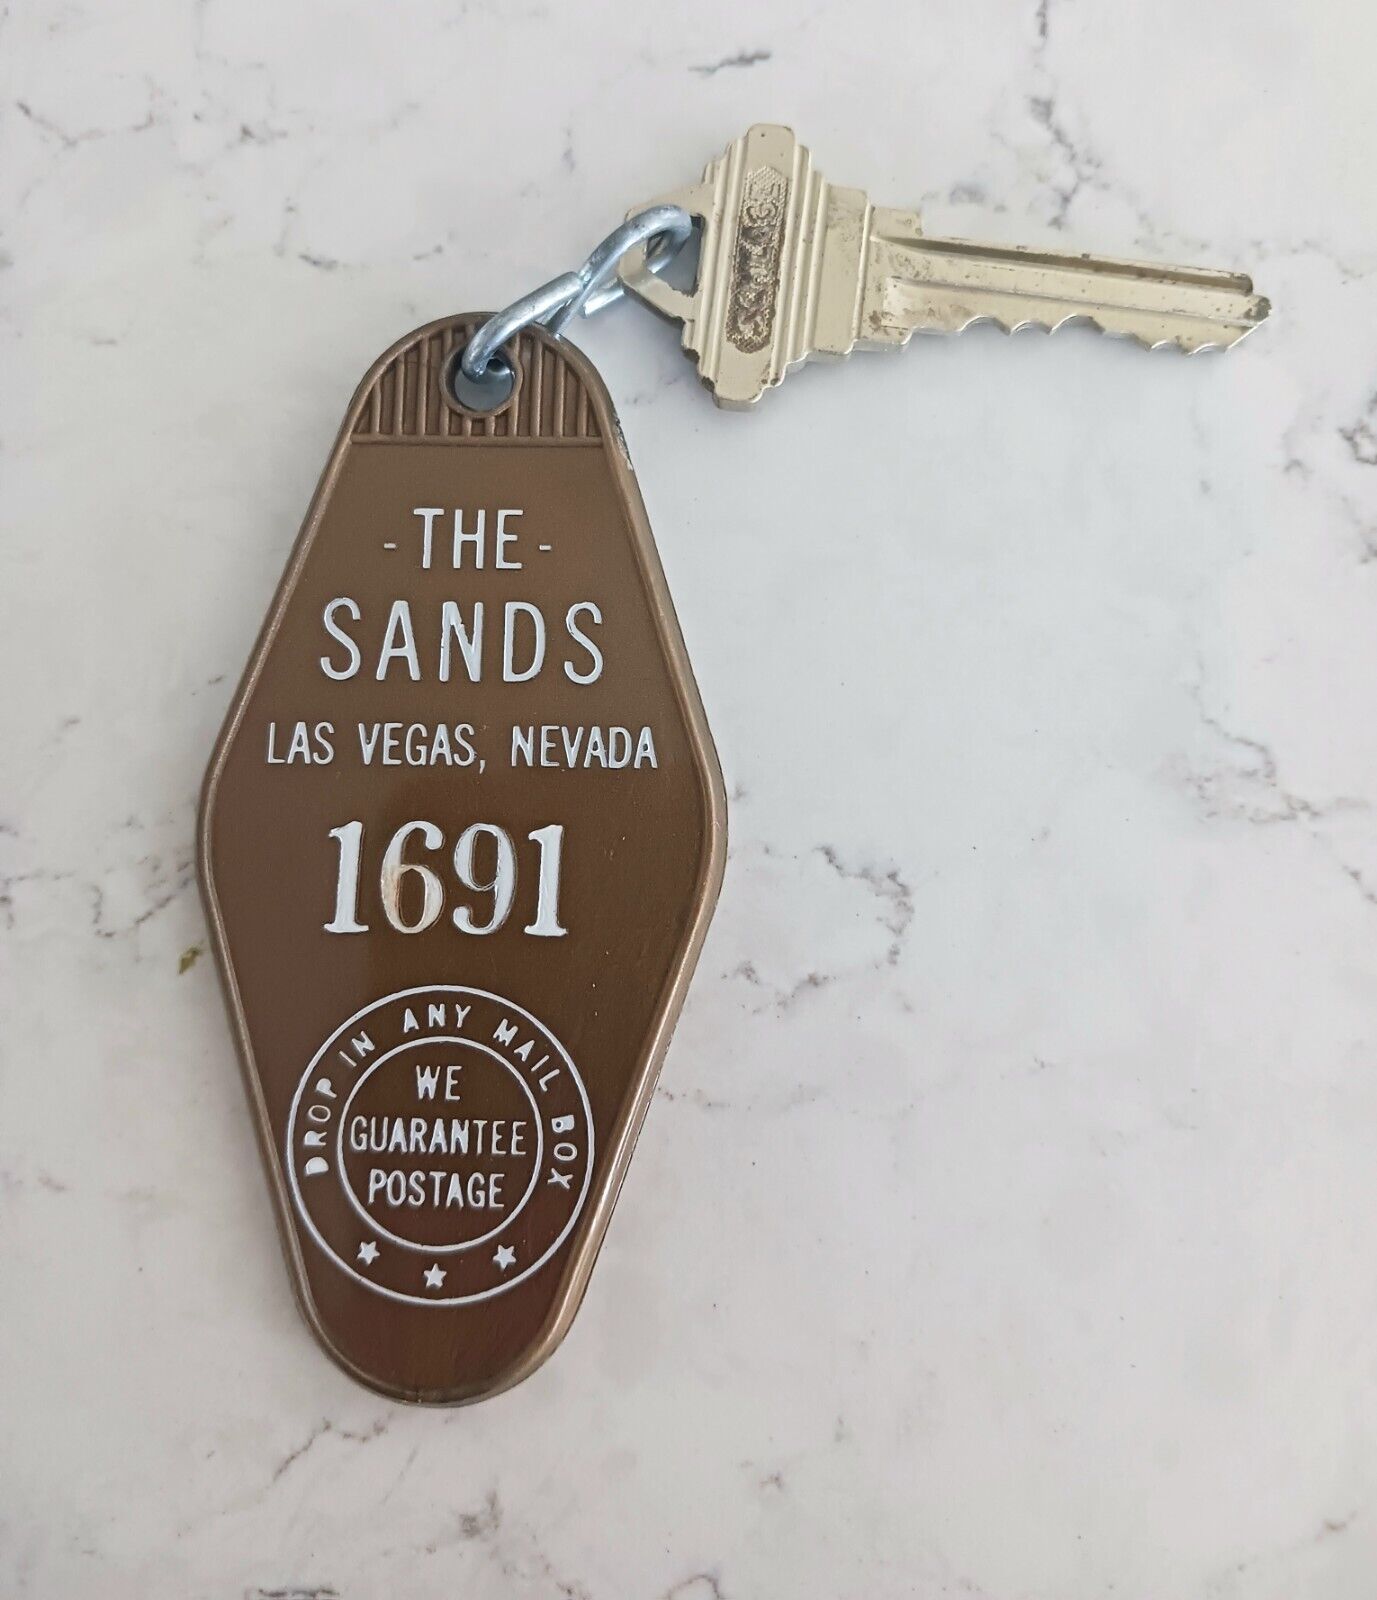 Vintage The Sands Hotel Casino Las Vegas Room Key and Fob Room #1691 TOWER